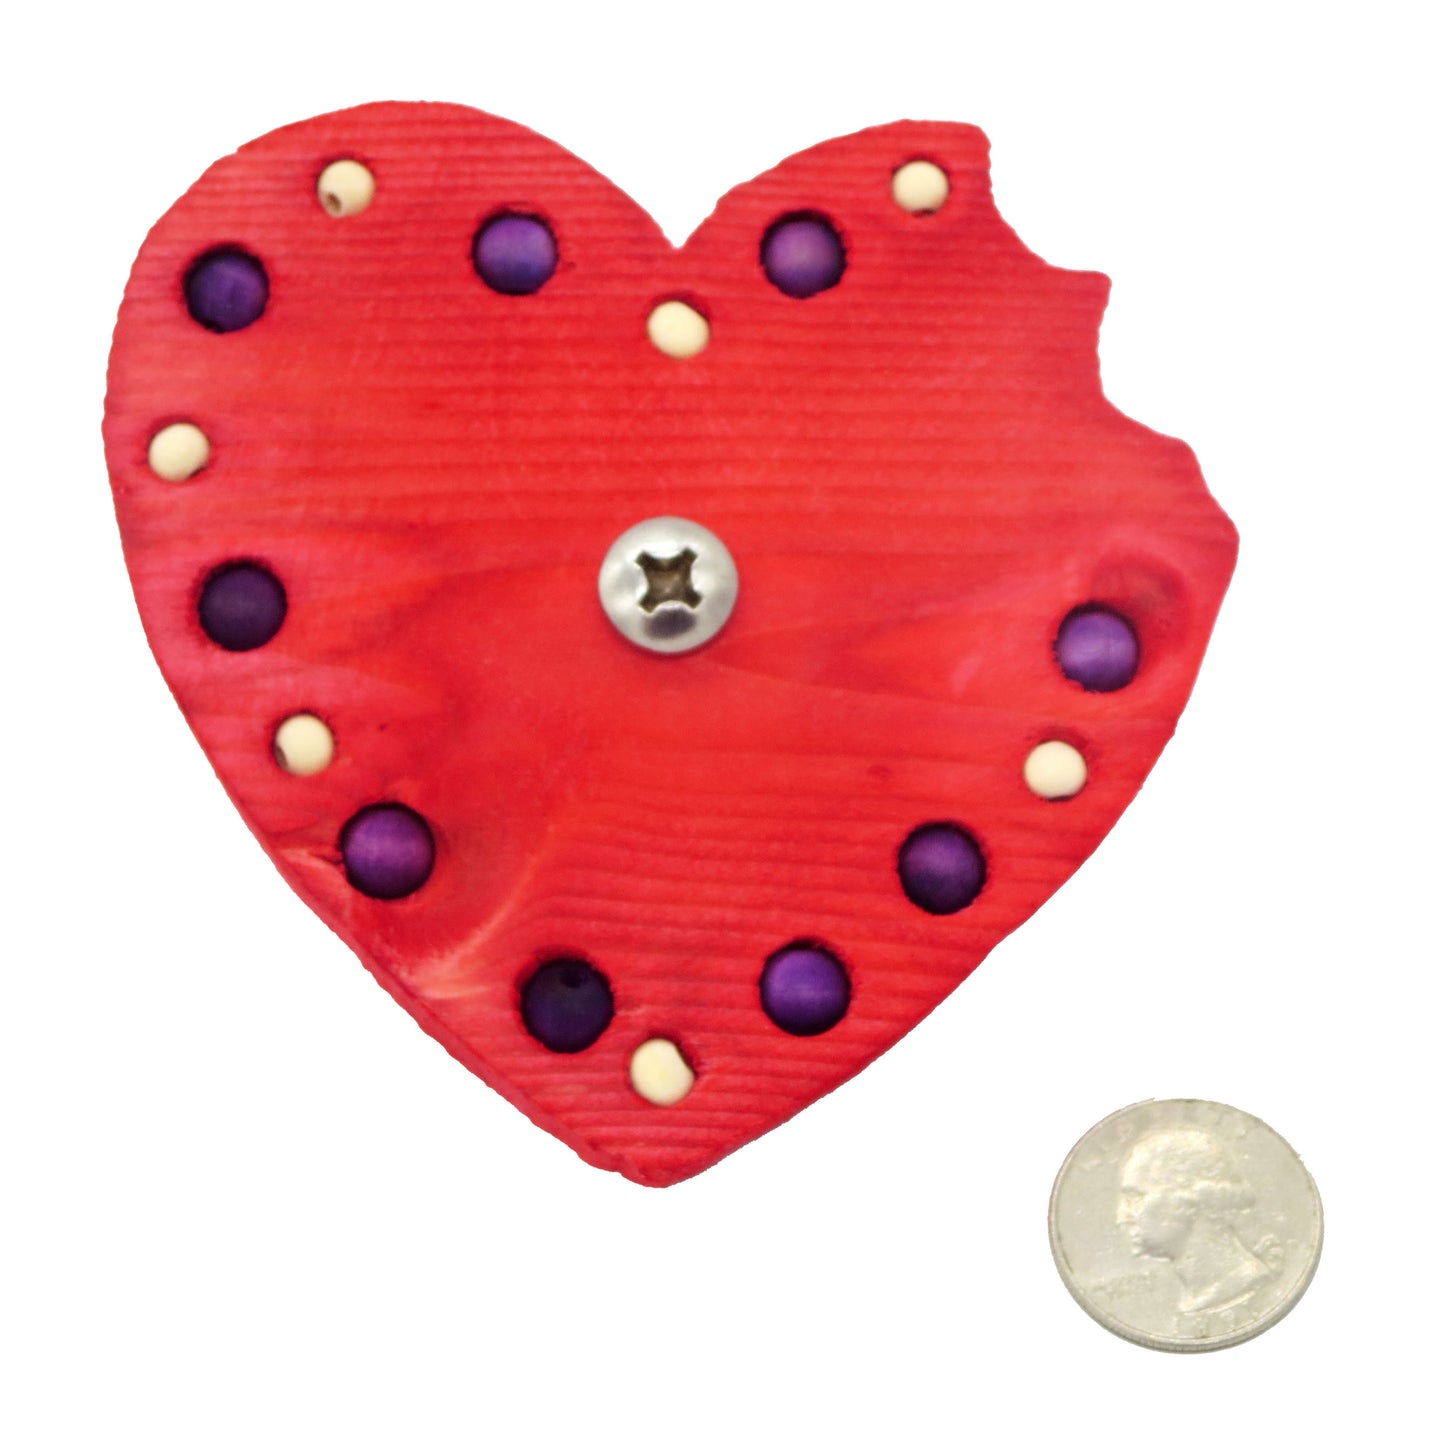 A heart shaped piece of pine with a "bite" taken out of the right lobe. Embedded with 8mm and 6mm beads around the border.  Shown with US quarter for scale